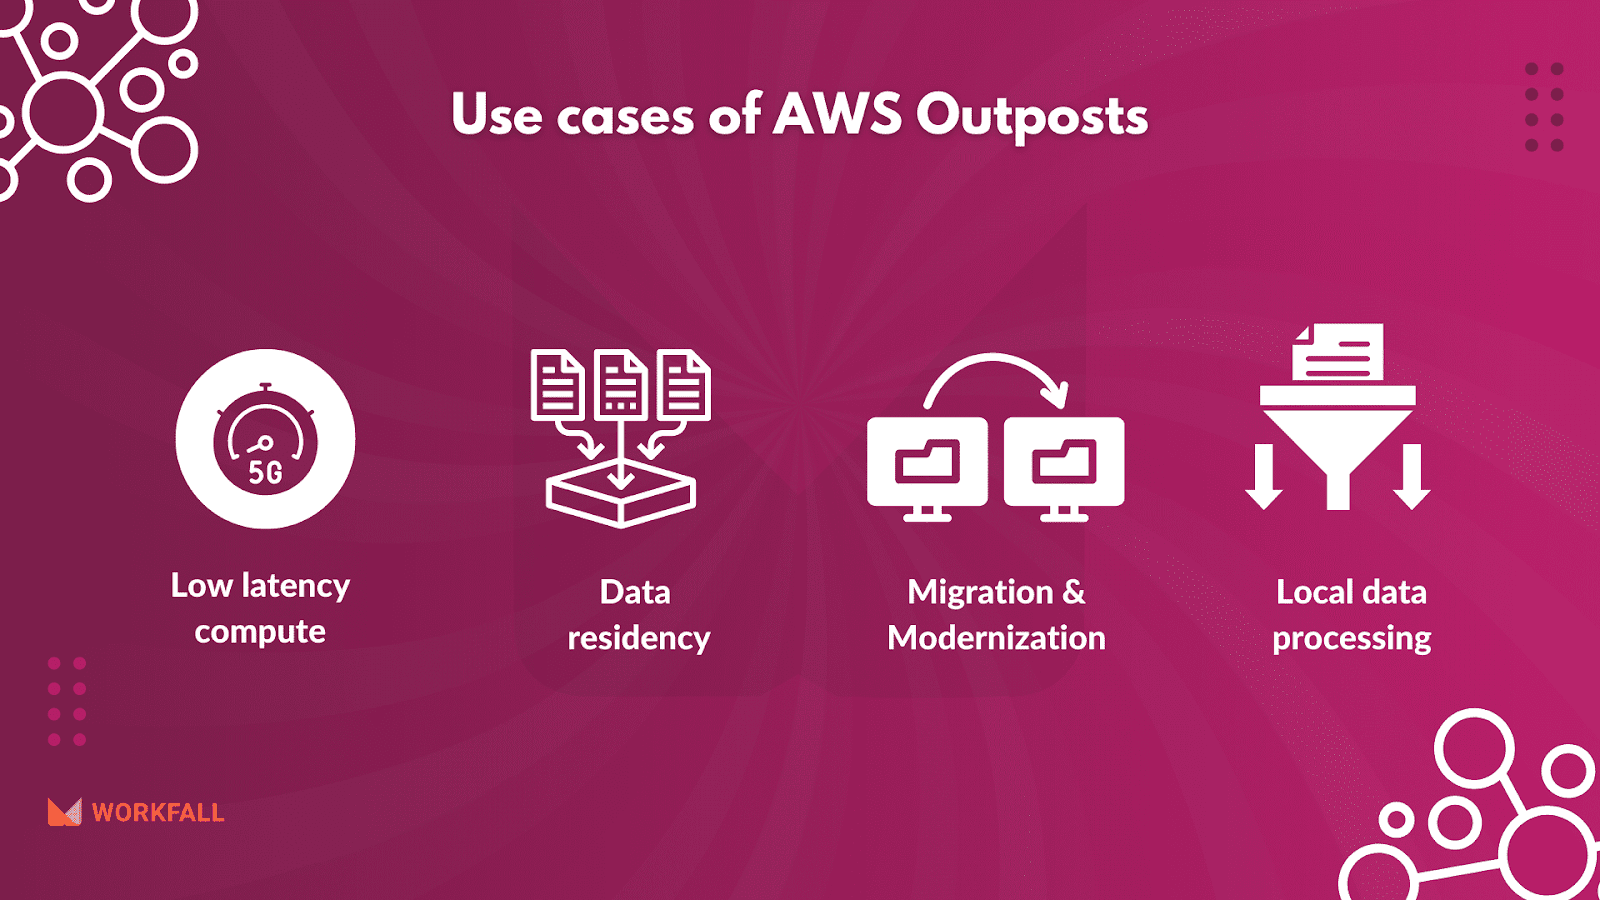 Use cases of AWS Outposts